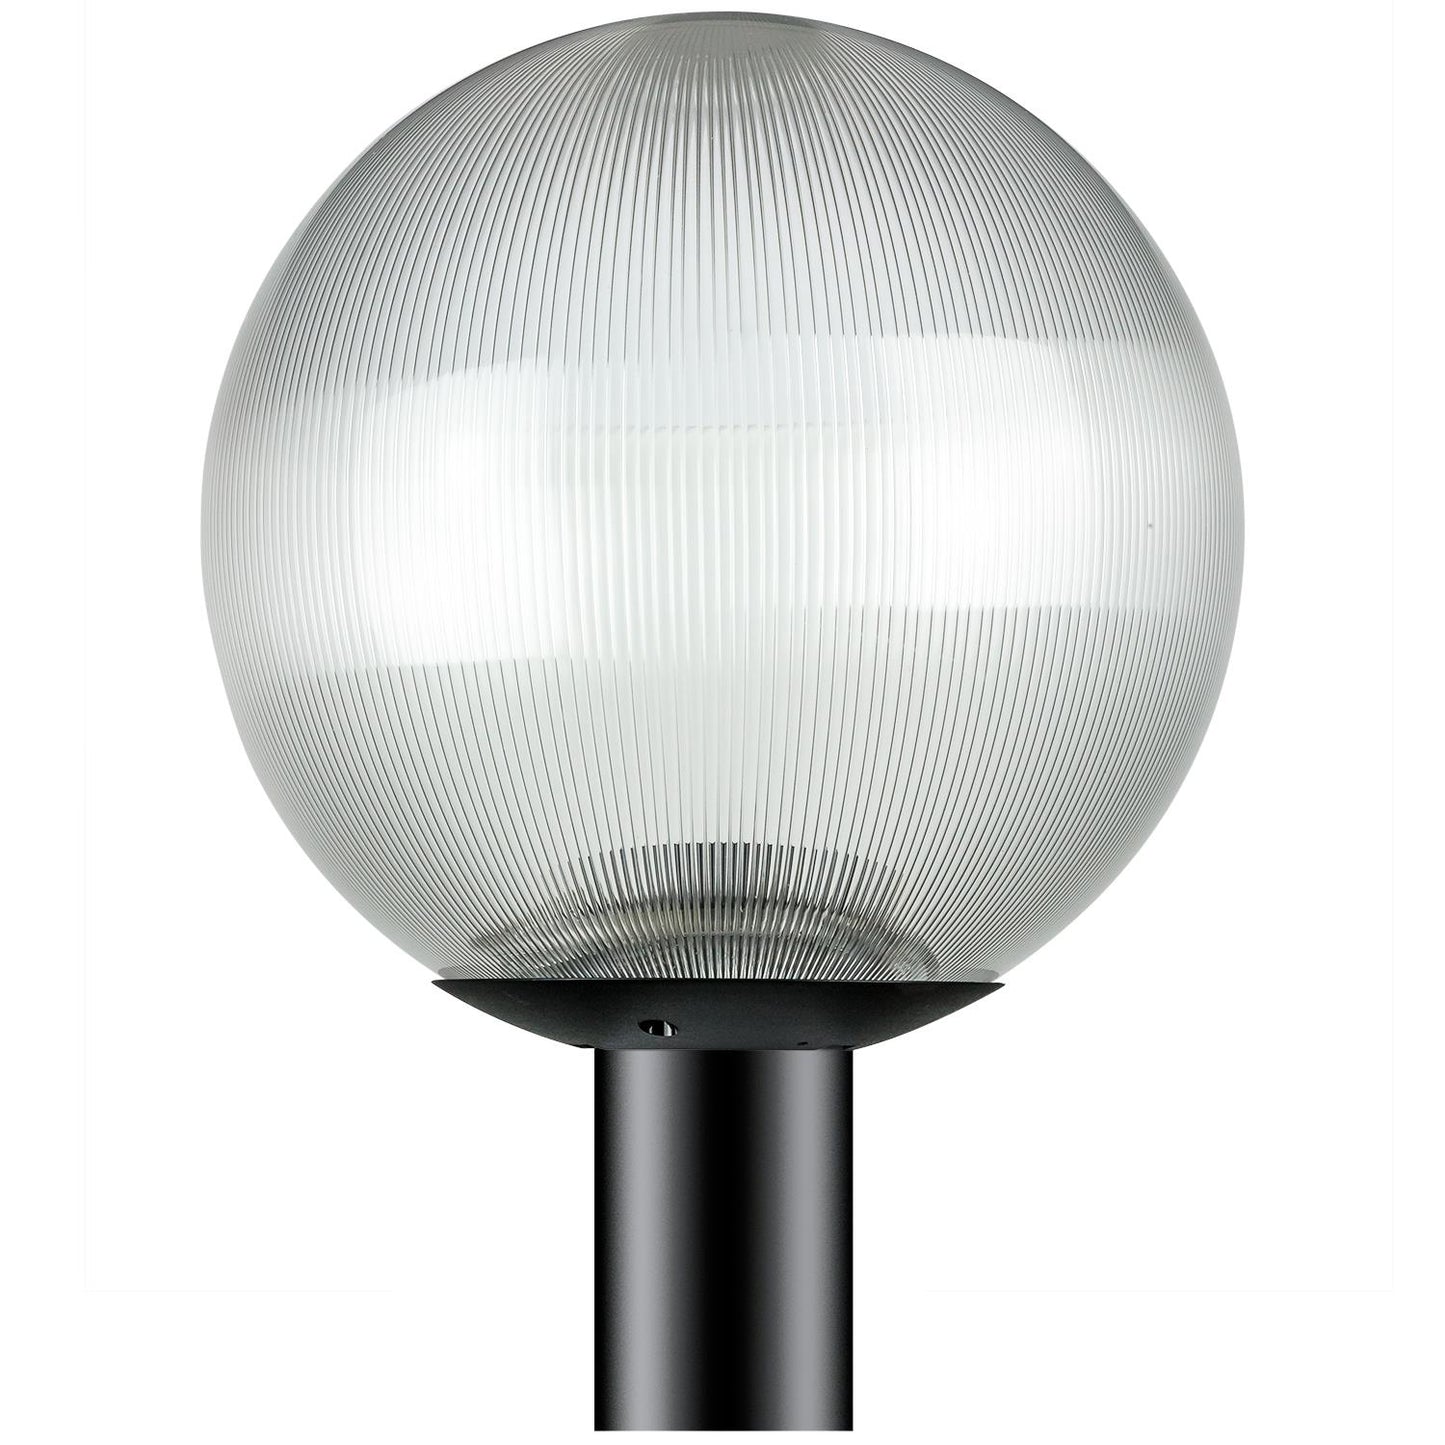 Sunlite 12" Decorative Outdoor Neckless Globe Polycarbonate Post Fixture, Black Finish, Clear Prismatic Lens, 3" Post Mount (not included)